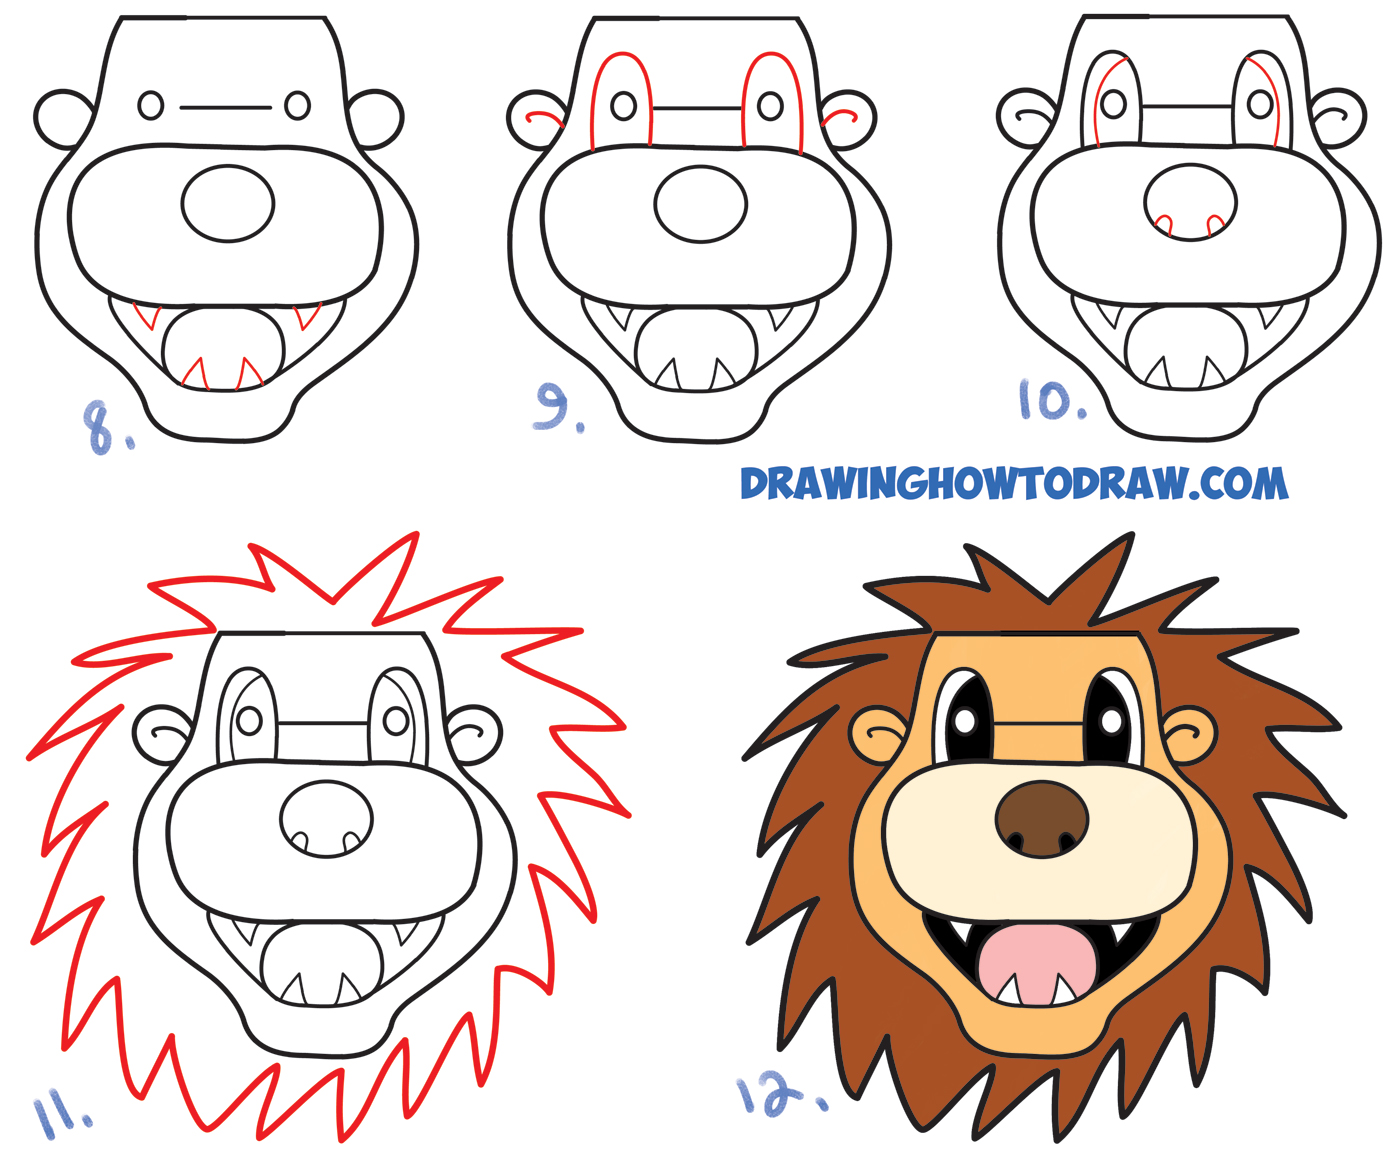 Learn How to Draw a Lion for Kids & Beginners - Video Guide